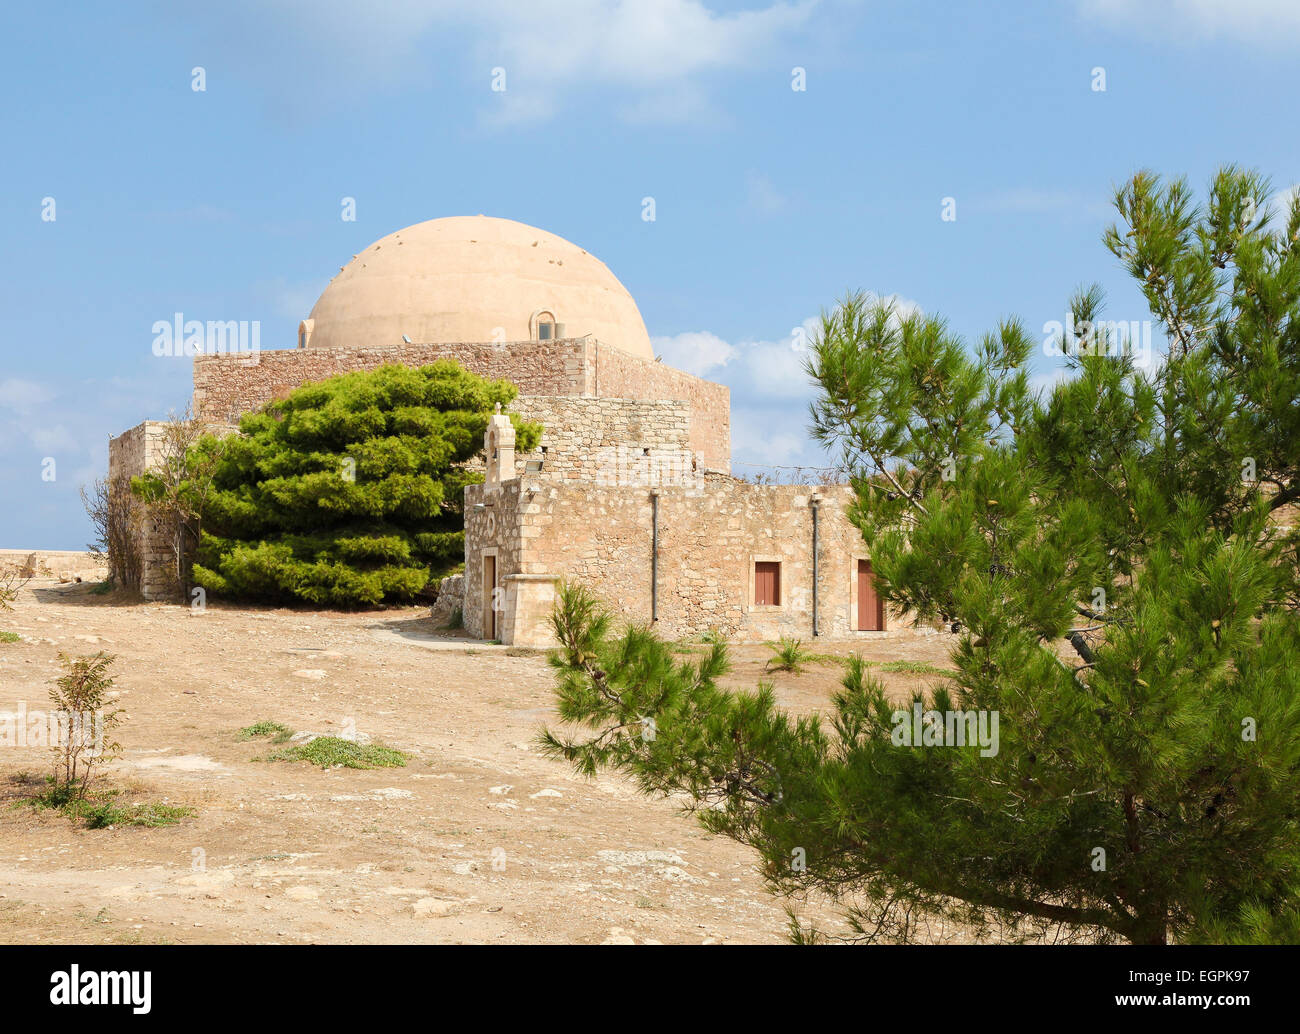 Venetian Fortezza or Citadel in the city of Rethymno on the island of Crete, Greece, created in 1573. Stock Photo